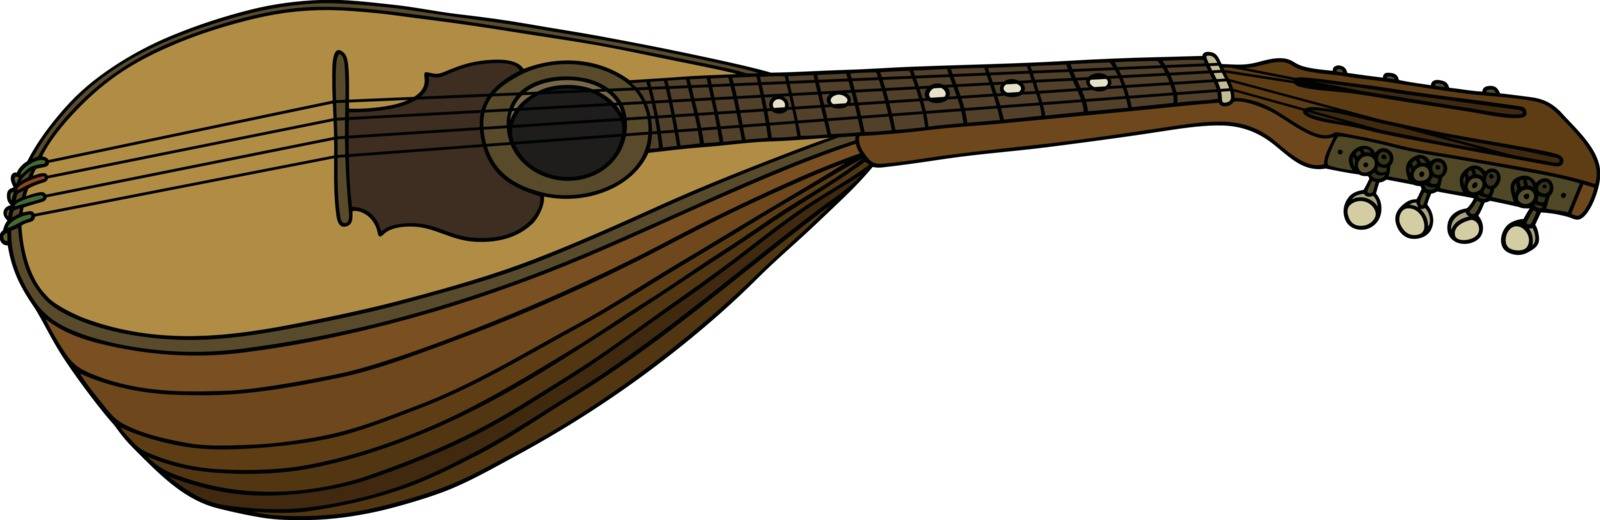 Hand drawing of a classic mandolin